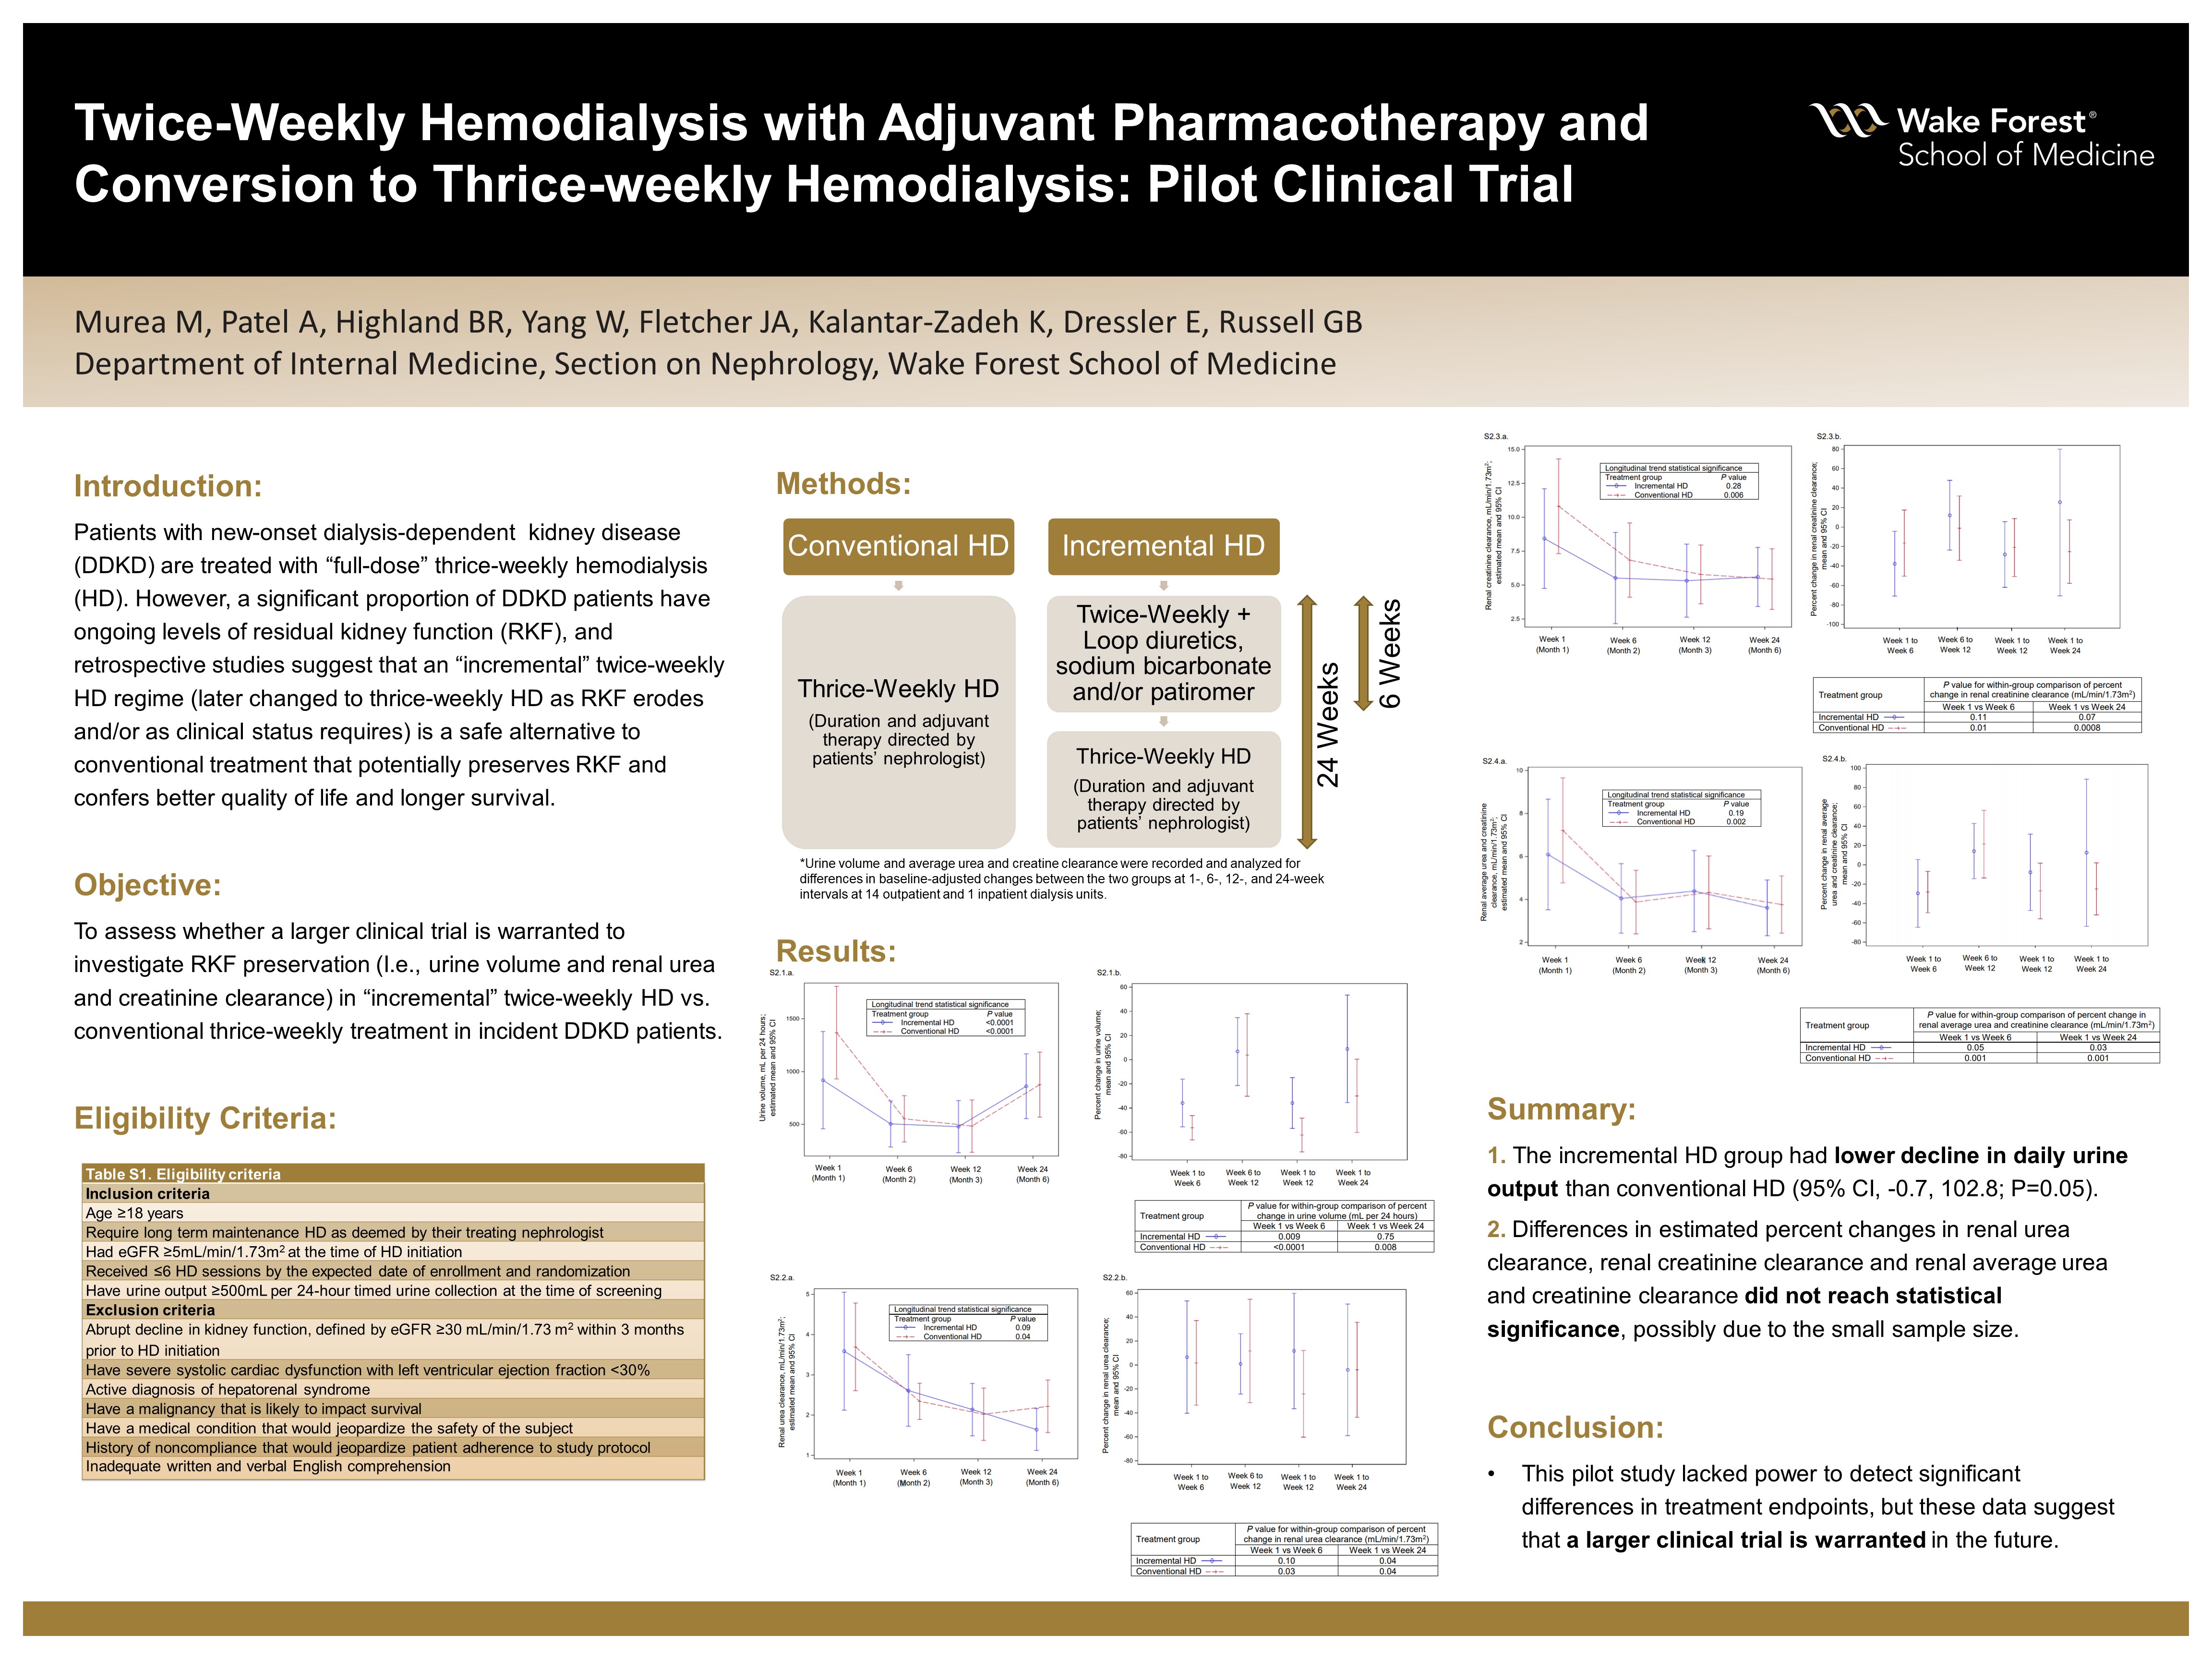 Showcase Image for Twice-Weekly Hemodialysis with Adjuvant Pharmacotherapy and Conversion to Thrice-weekly Hemodialysis: A Pragmatic, Fully-Embedded, Individually-Randomized Pilot Clinical Trial